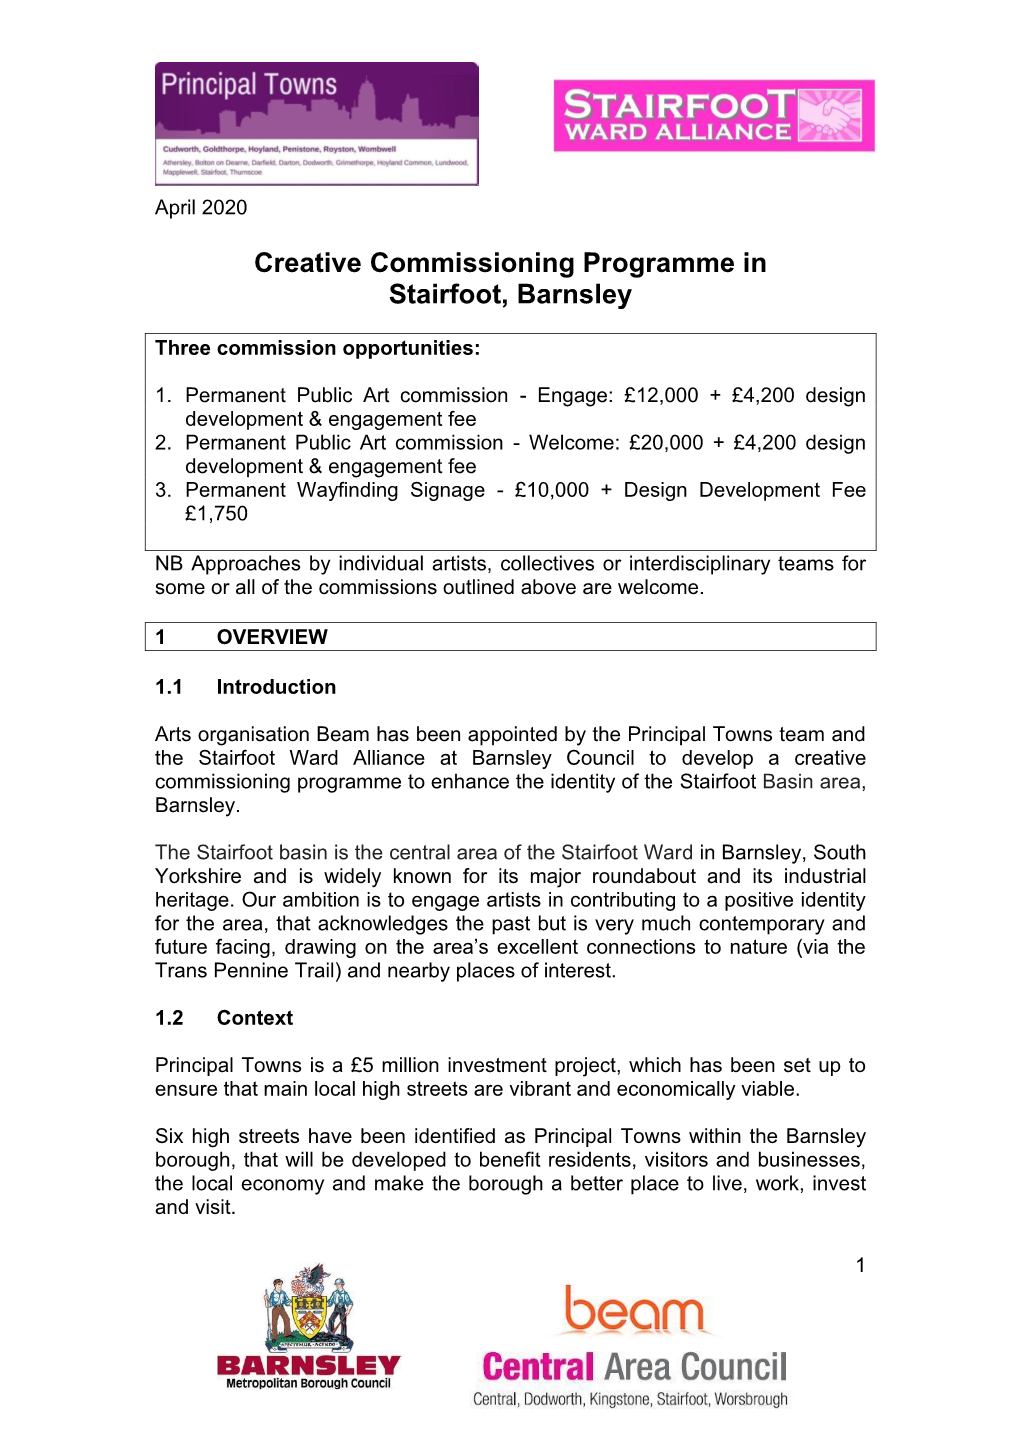 Creative Commissioning Programme in Stairfoot, Barnsley